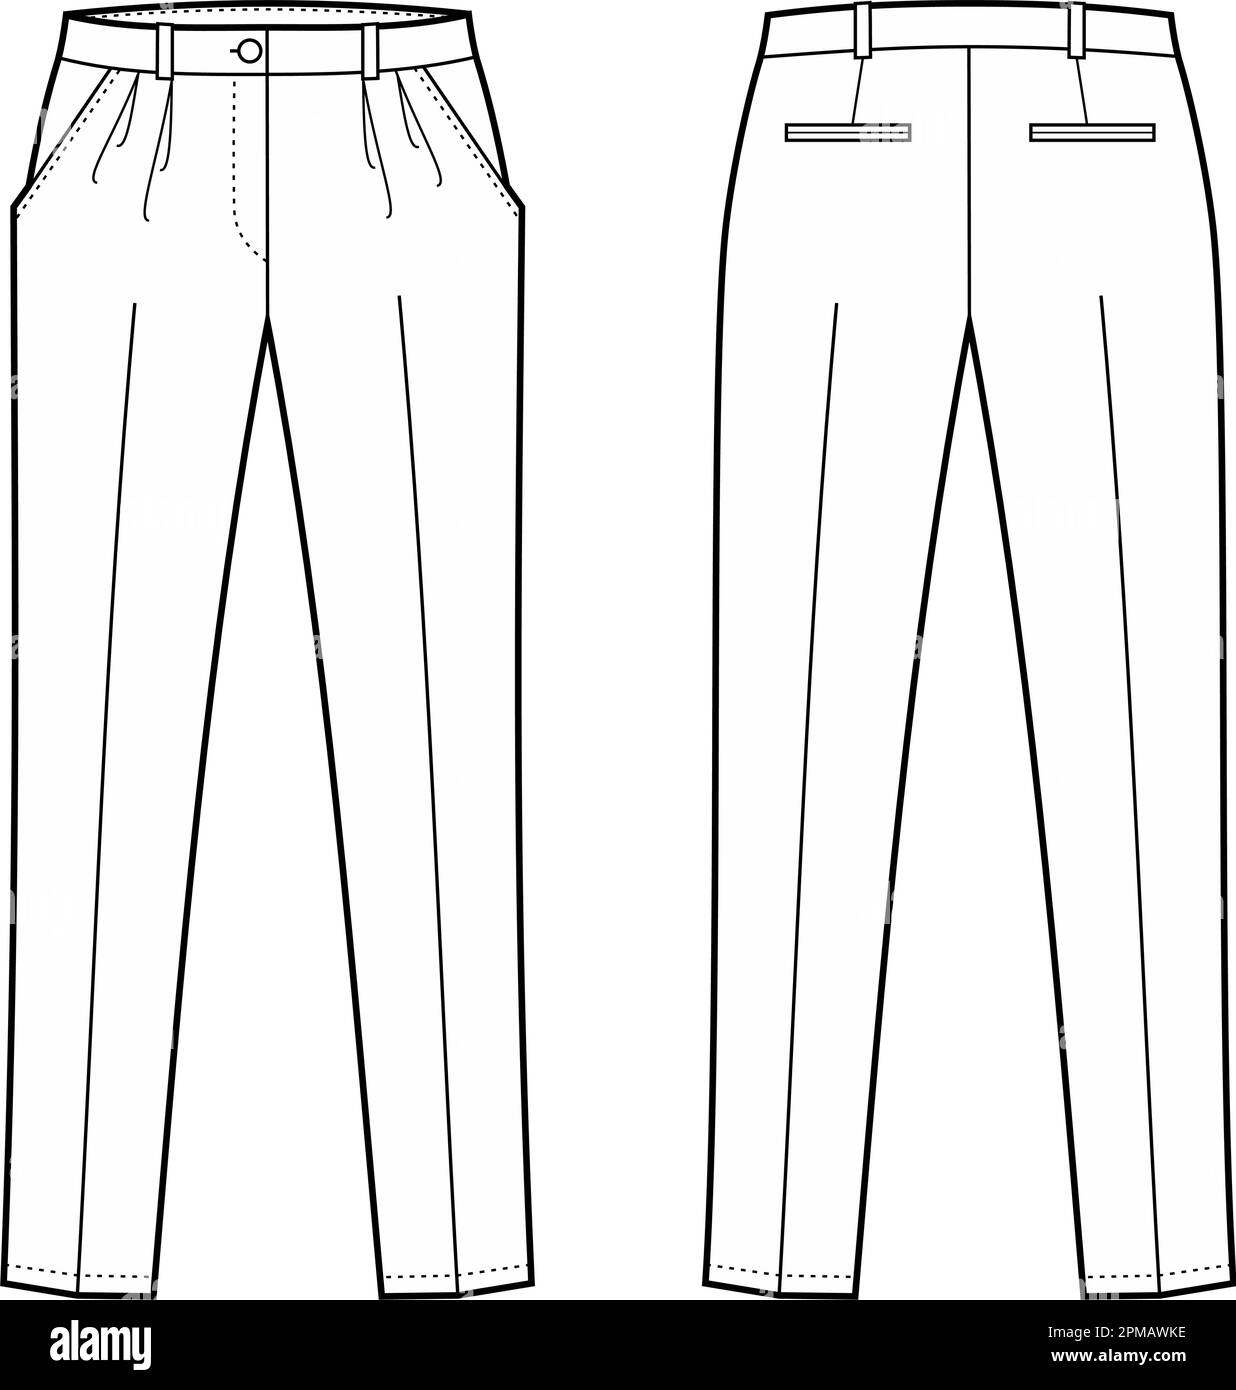 Download Trying on Suit Pants Illustration in SVG  PNG